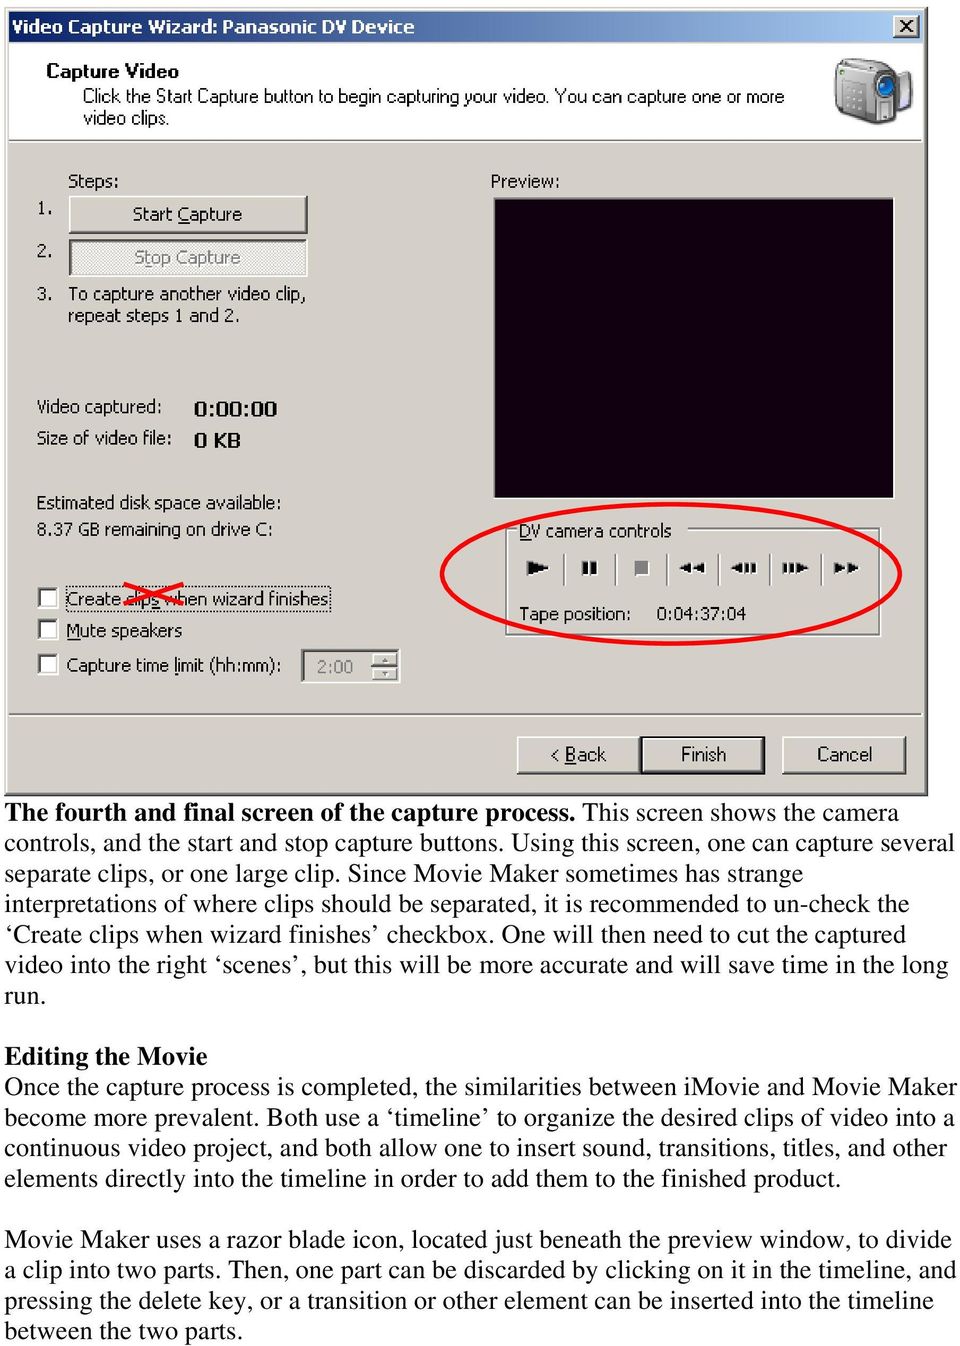 Since Movie Maker sometimes has strange interpretations of where clips should be separated, it is recommended to un-check the Create clips when wizard finishes checkbox.